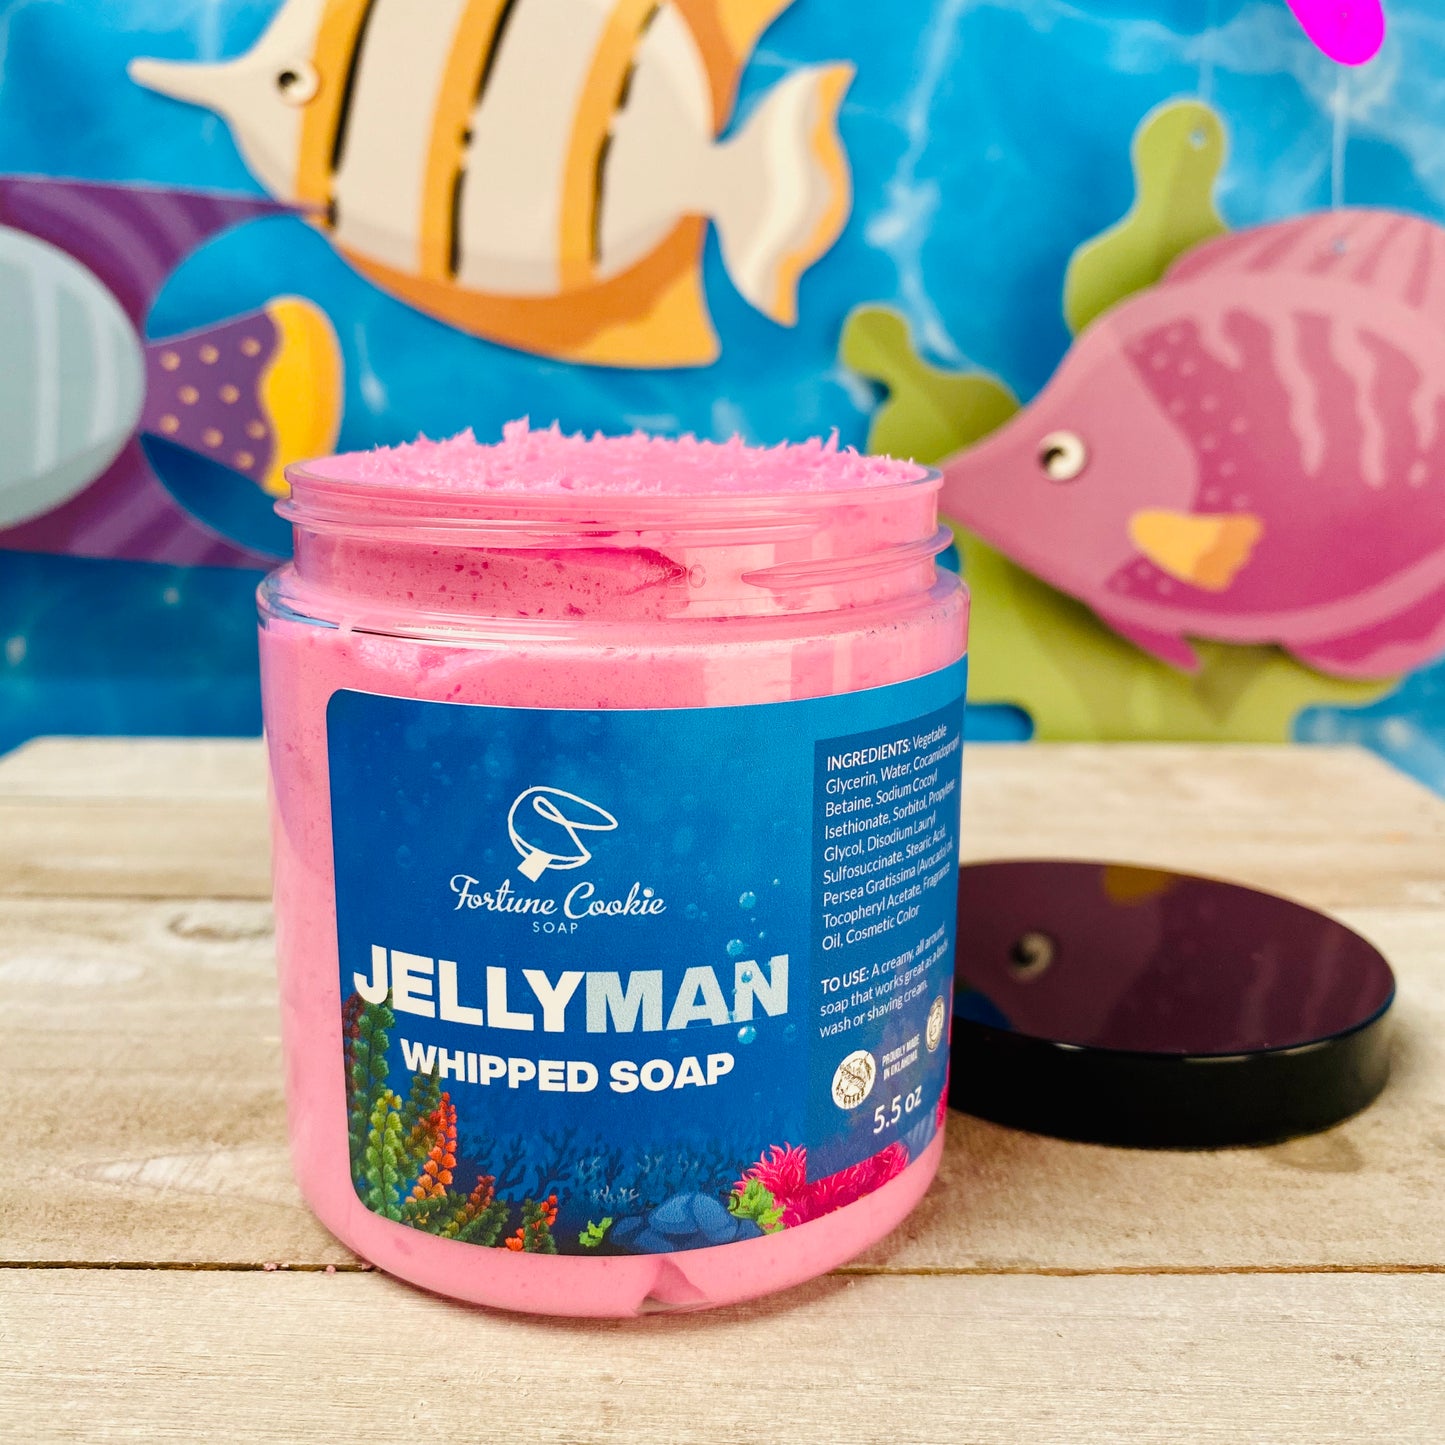 JELLYMAN Whipped Soap